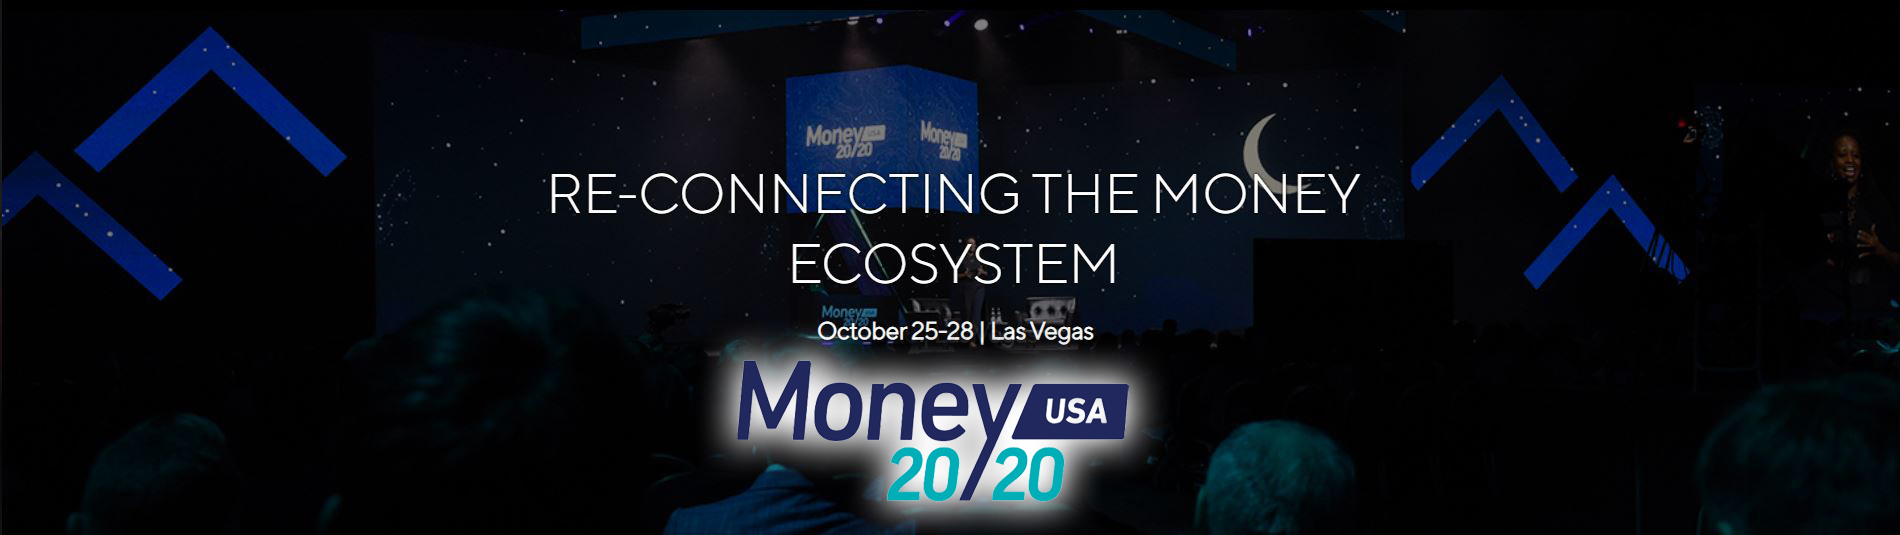 Trade Show Exhibits and Displays For Money 2020 | Las Vegas